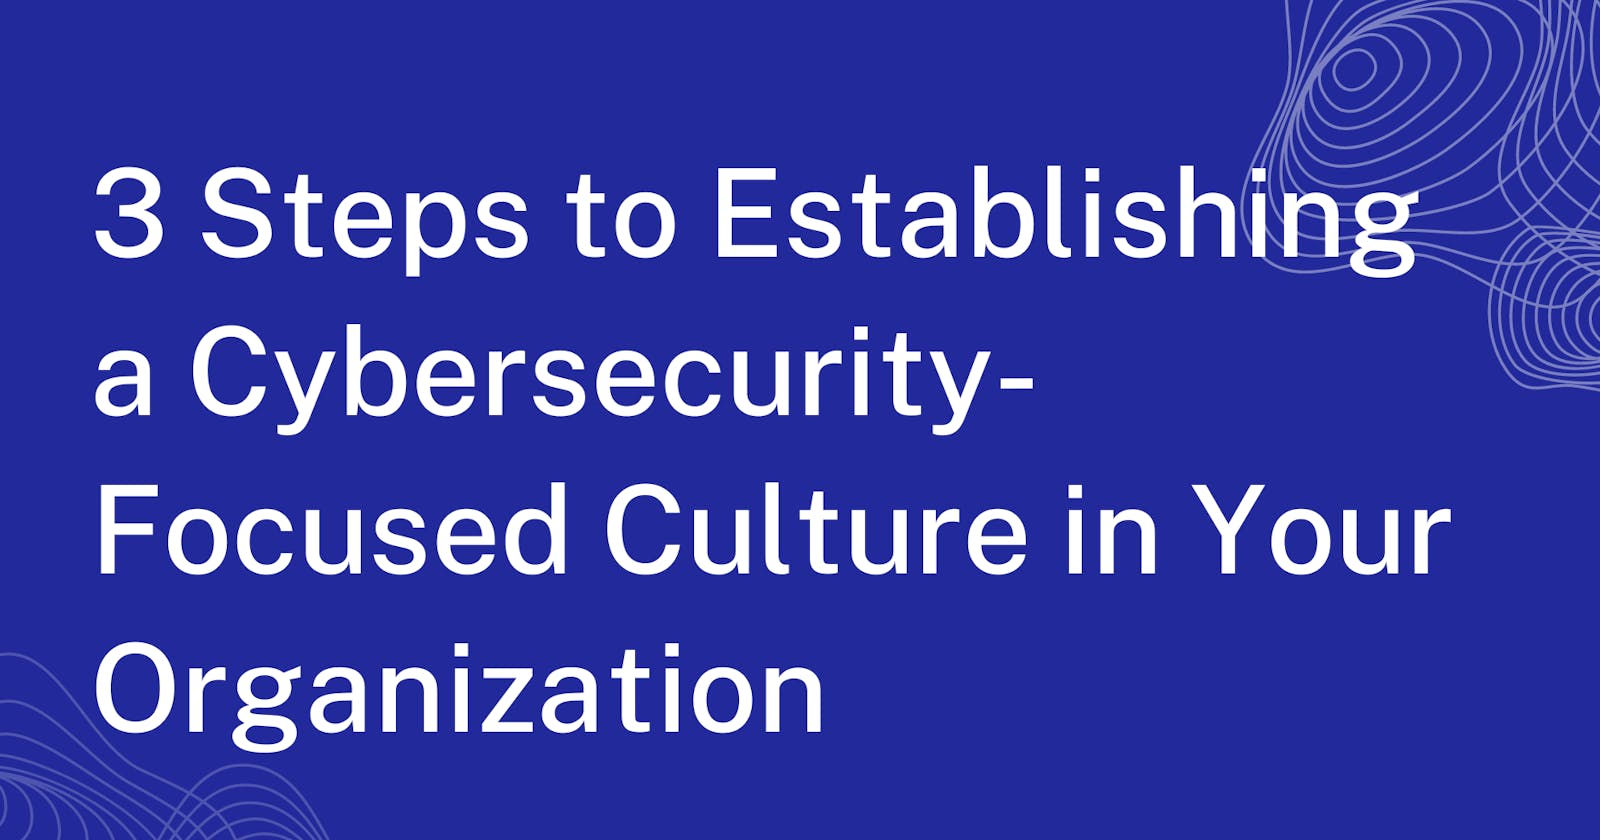 3 Steps to Establishing a Cybersecurity-Focused Culture in Your Organization